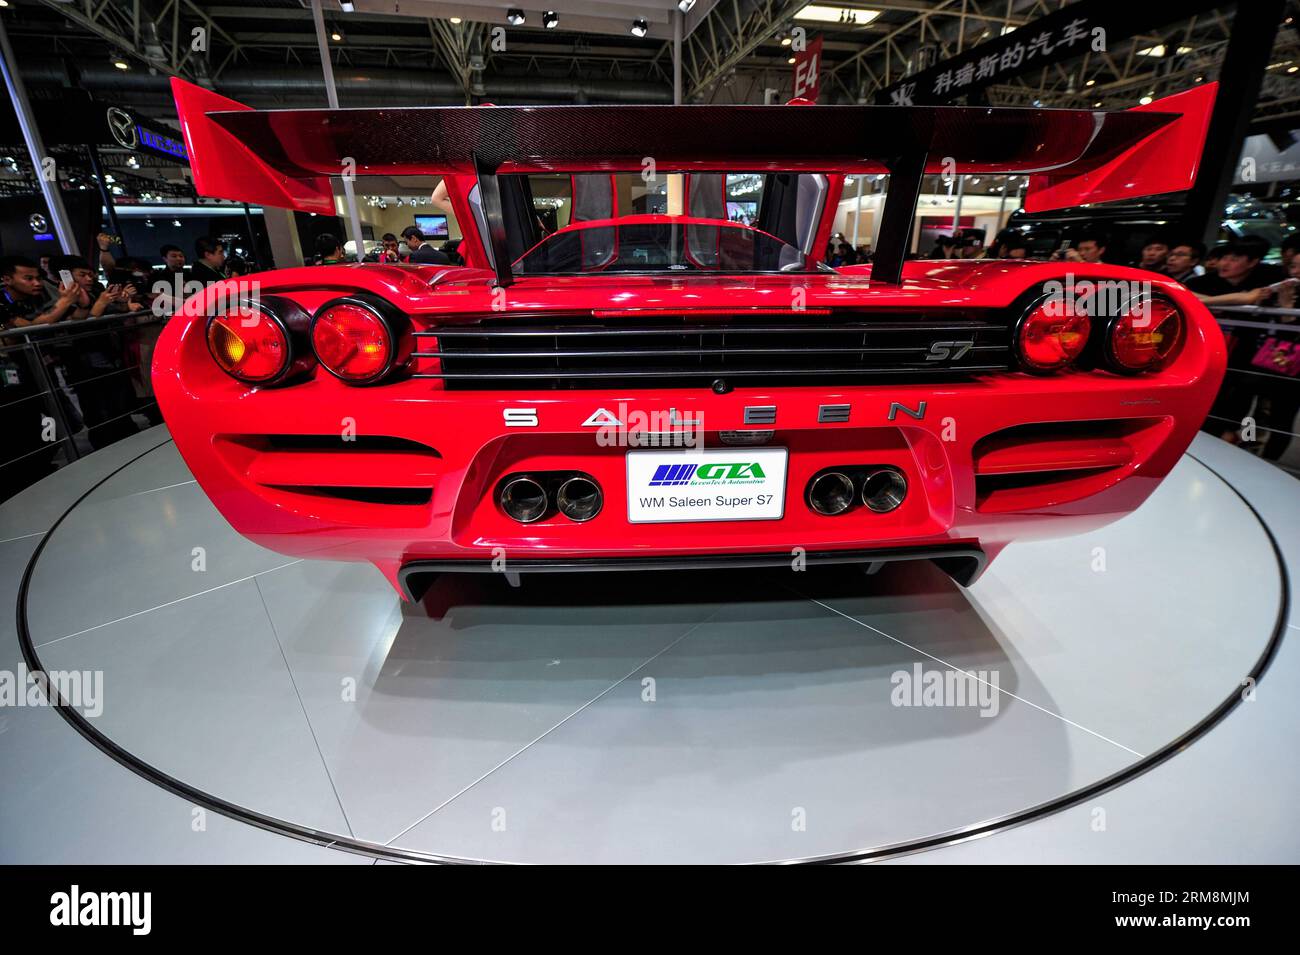 (140420) -- BEIJING, April 20, 2014 (Xinhua) -- A WM Saleen S7 sports car is displayed during the media preview of the 2014 Beijing International Automotive Exhibition in Beijing, China, April 20, 2014. Boasting 410 km/h top speed, the car is driven by a V8 7.0 liter engine producing 1060 horsepower and goes from 0 to 100 km/h in 2.4 seconds. The auto show will be held on April 21-29, attracting over 2,000 exhibitors from 14 countries and regions. (Xinhua/Yang Guang) (hdt) CHINA-BEIJING-AUTO-EXHIBITION (CN) PUBLICATIONxNOTxINxCHN   Beijing April 20 2014 XINHUA a World Cup Saleen S7 Sports Car Stock Photo